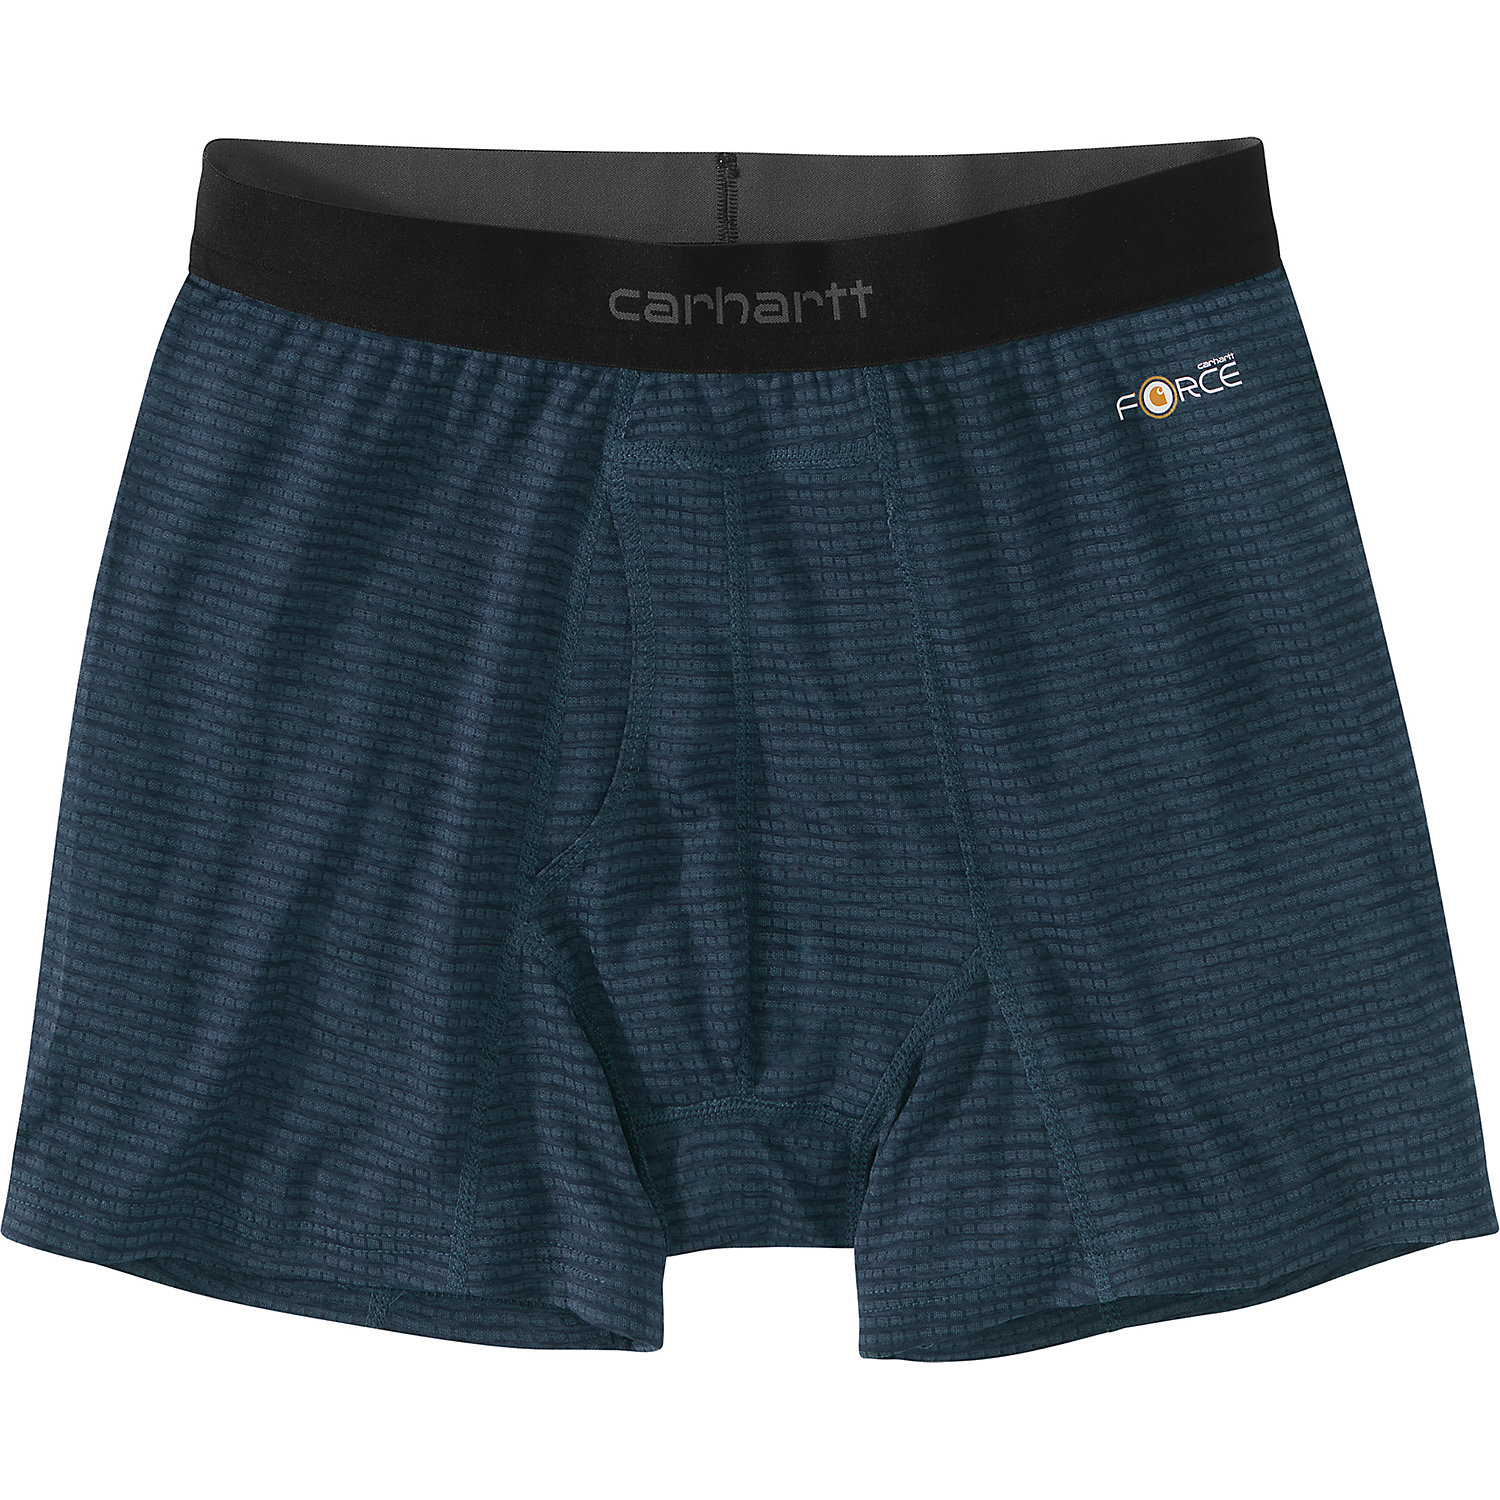 Carhartt Mens Base Force 5 Inch Boxer Brief